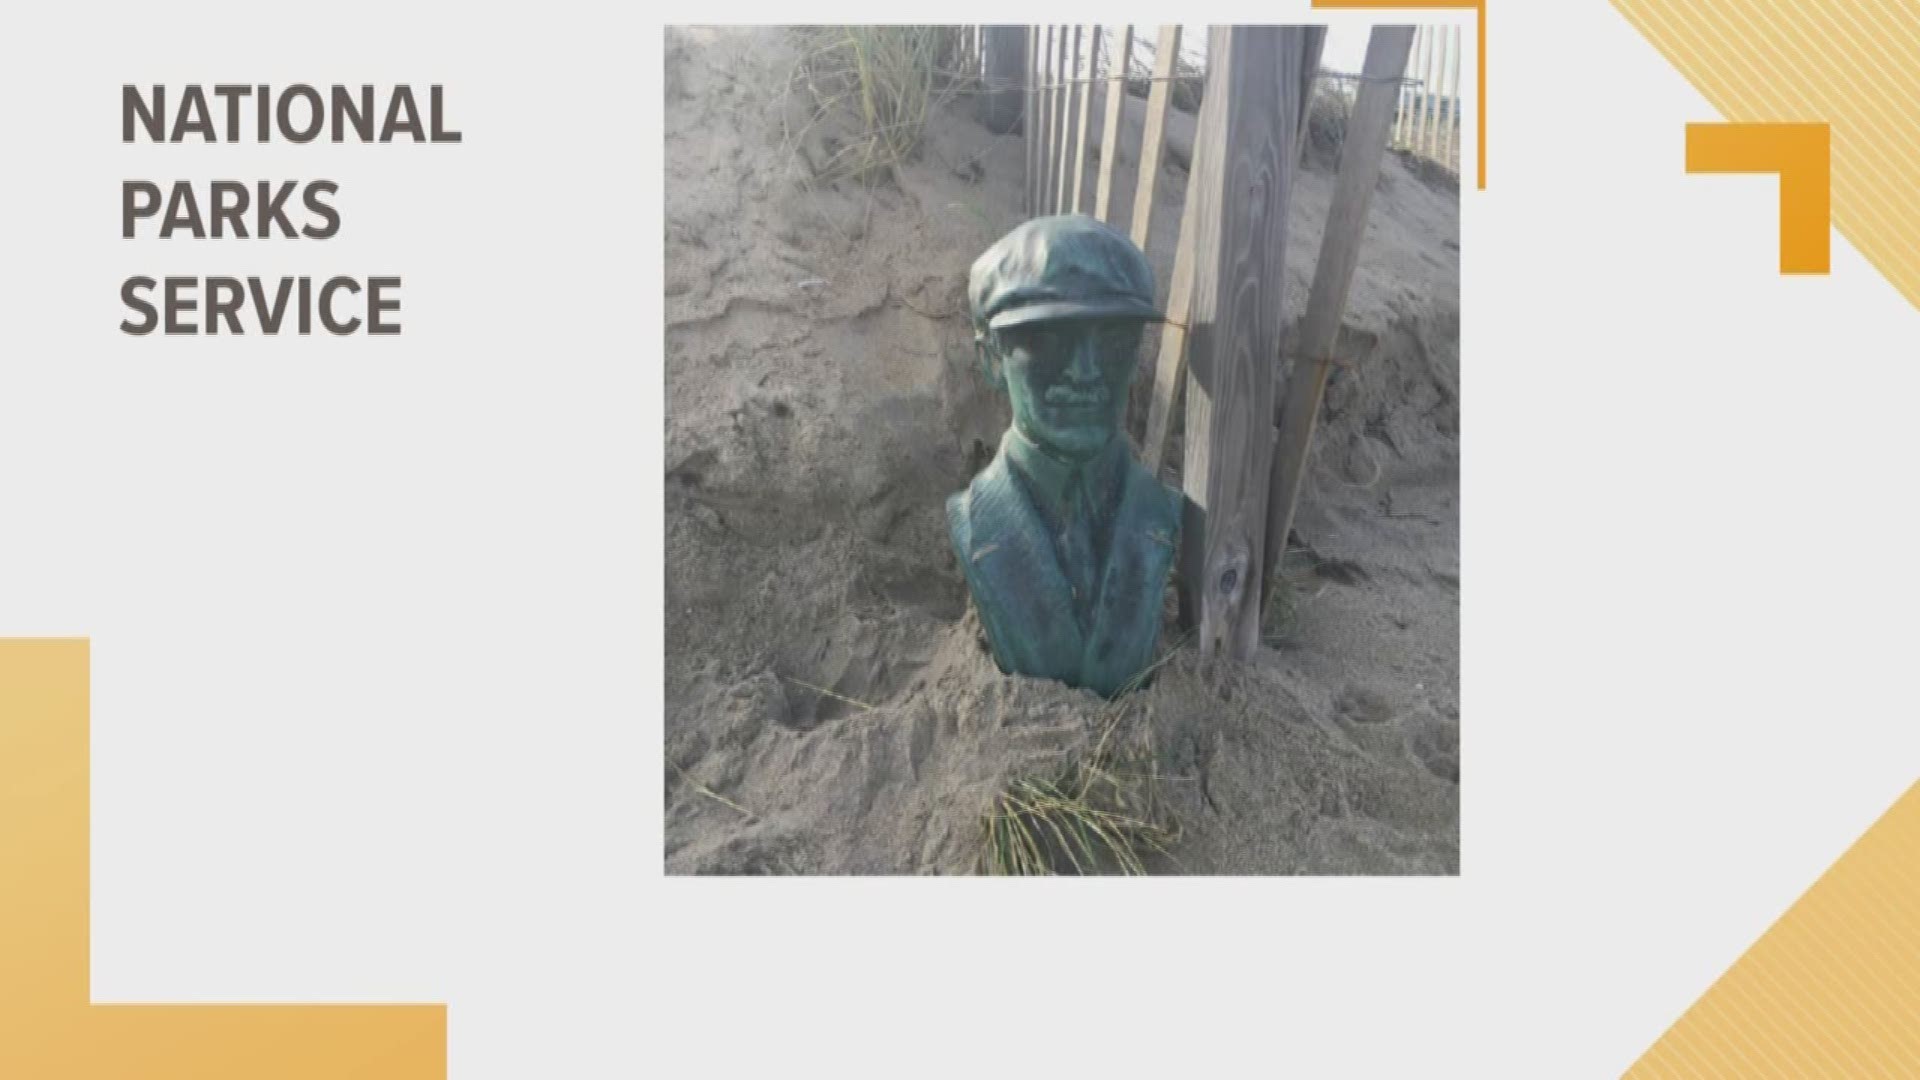 The bust was about a mile from the Wright Brothers National Memorial, tucked away in some dunes.